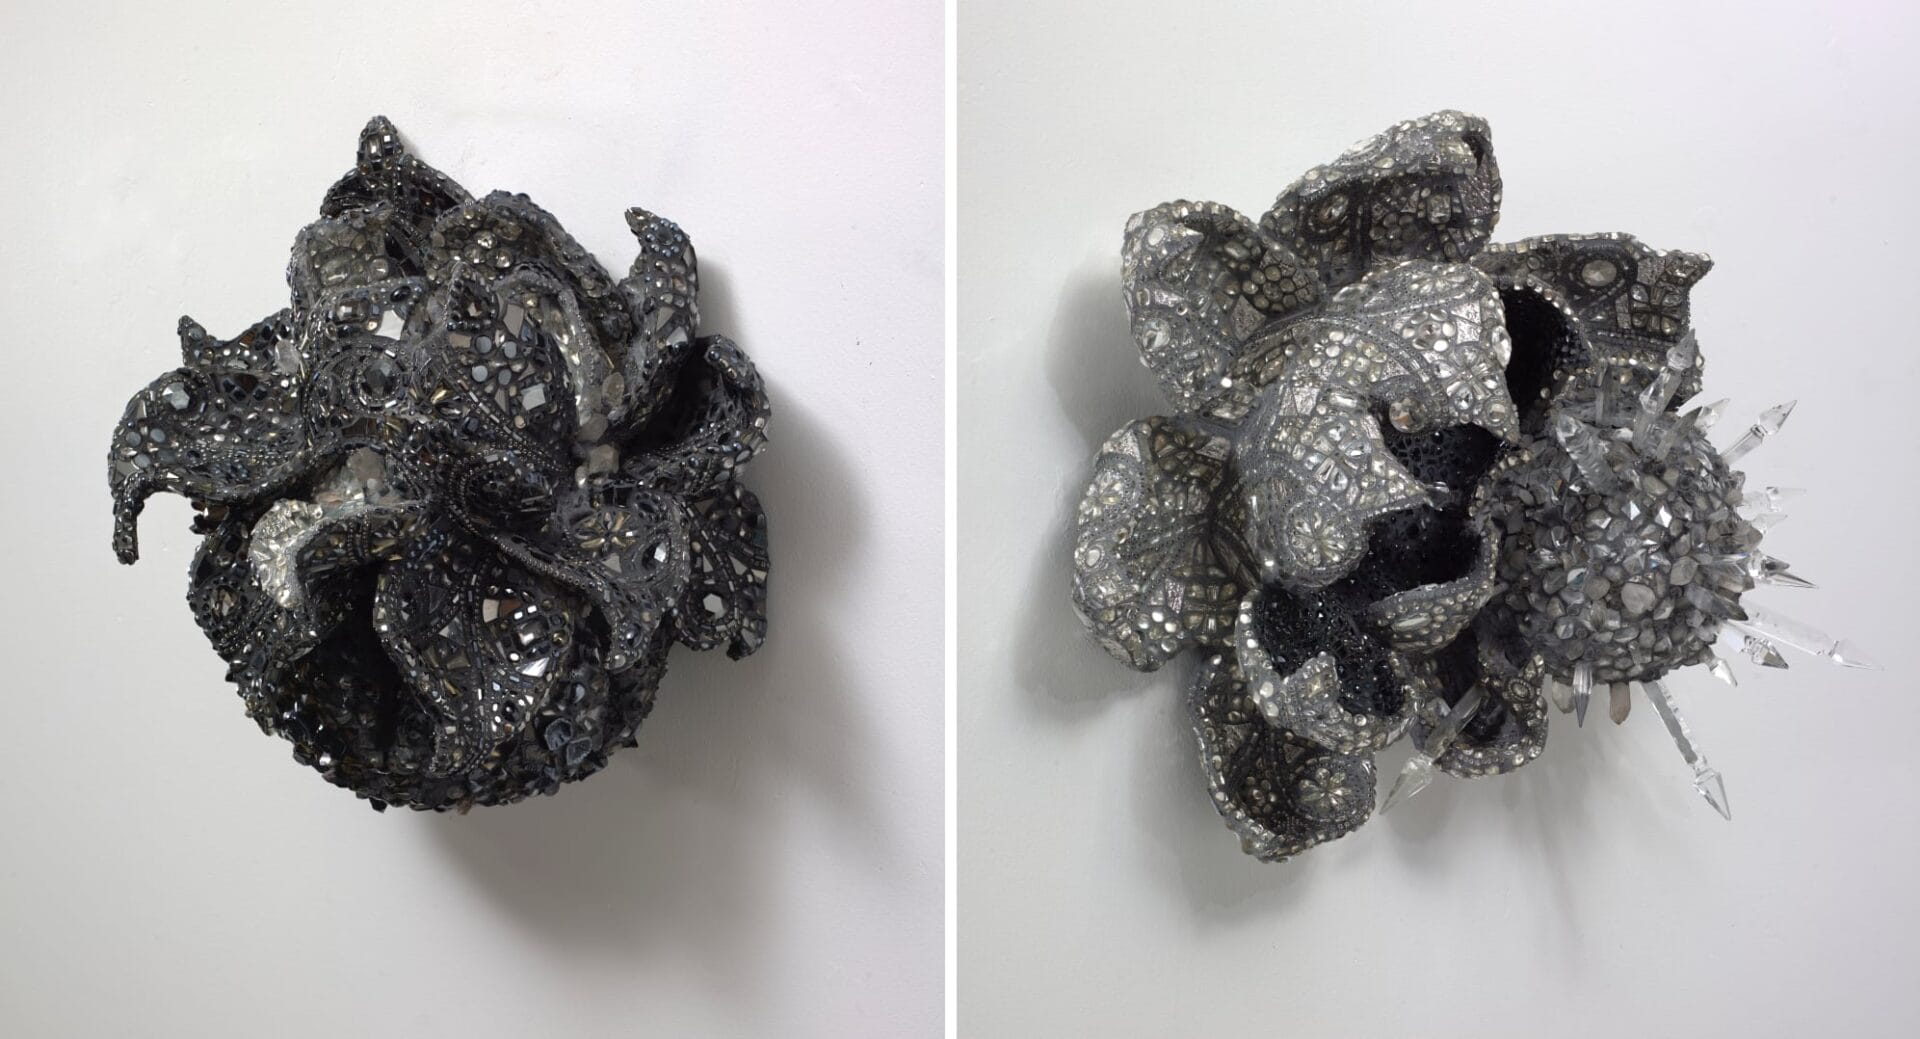 left: a black floral sculpture covered in mosaic tiles and glimmering crystals. right: right: a silver floral sculpture covered in mosaic tiles and glimmering crystals. 